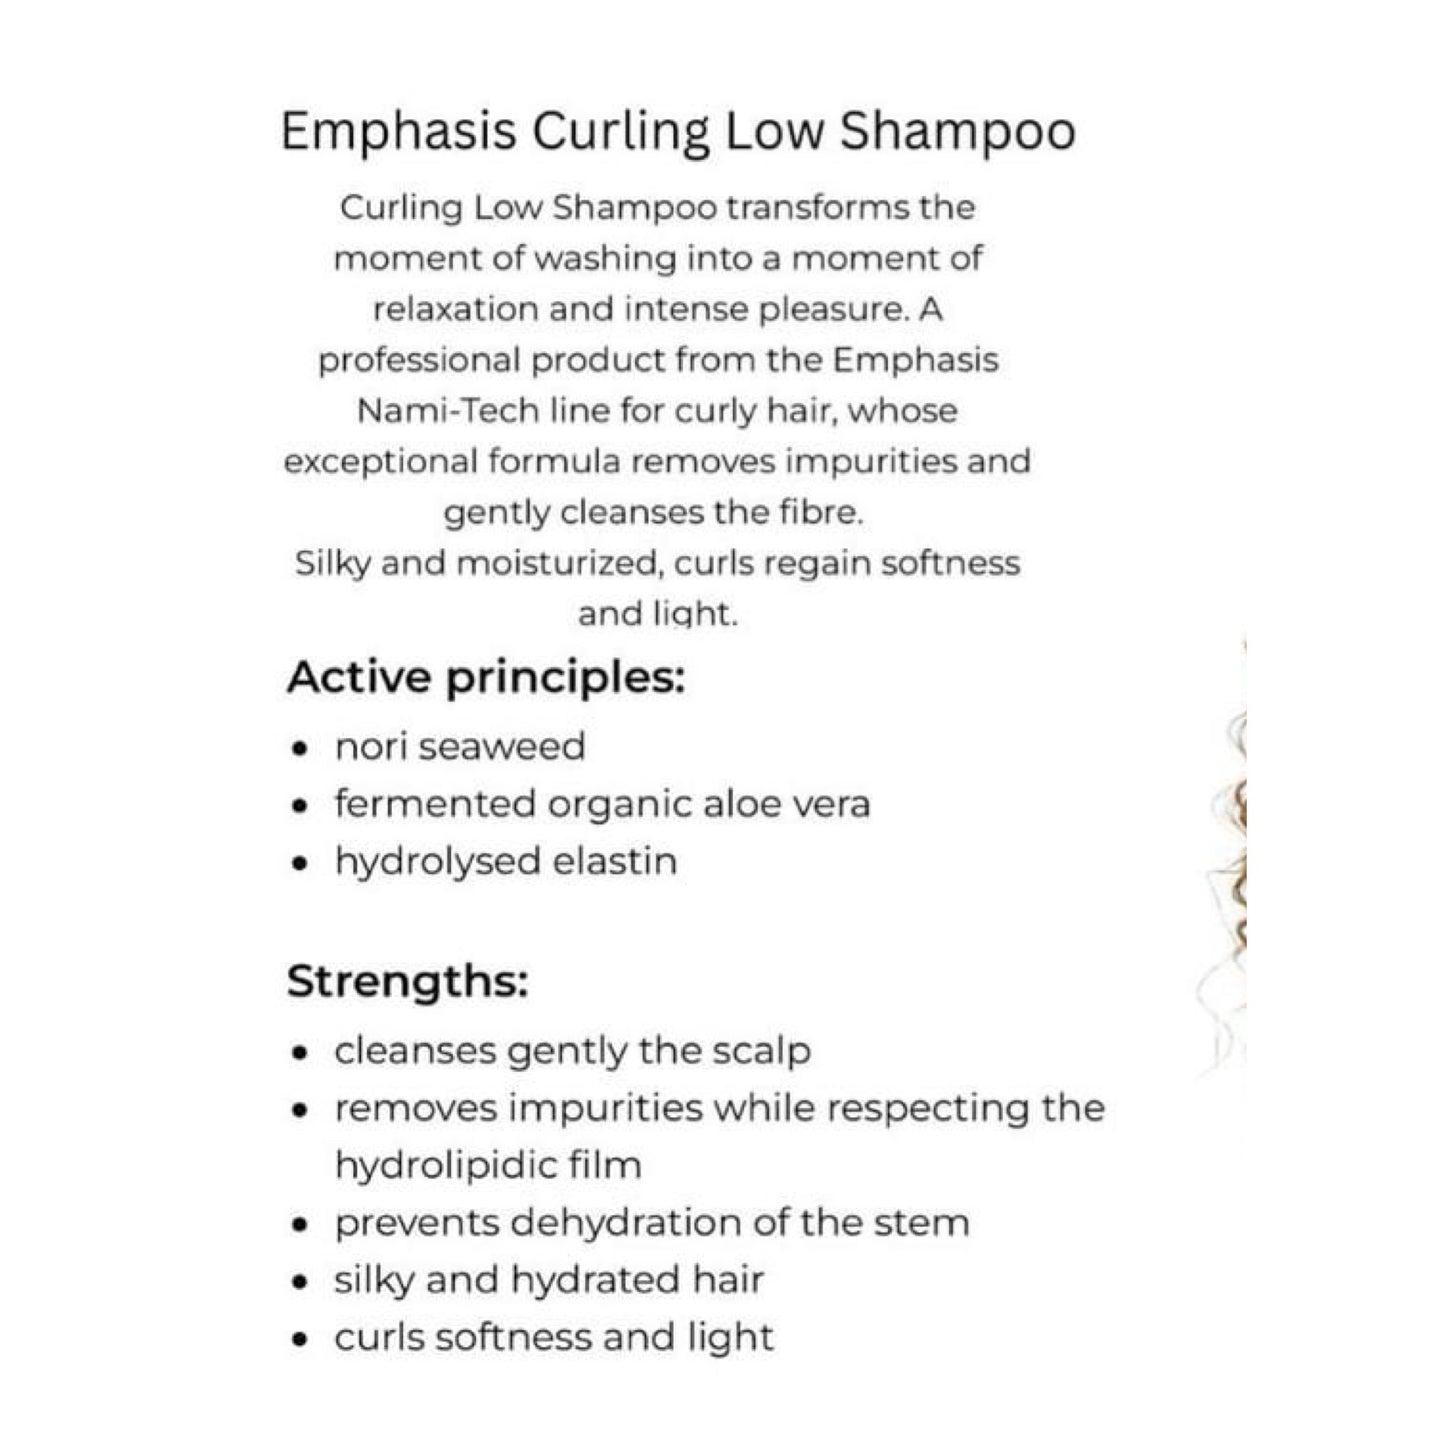 MHP- Italian Emphasis Curly Hair Style Base Leave in 200ml